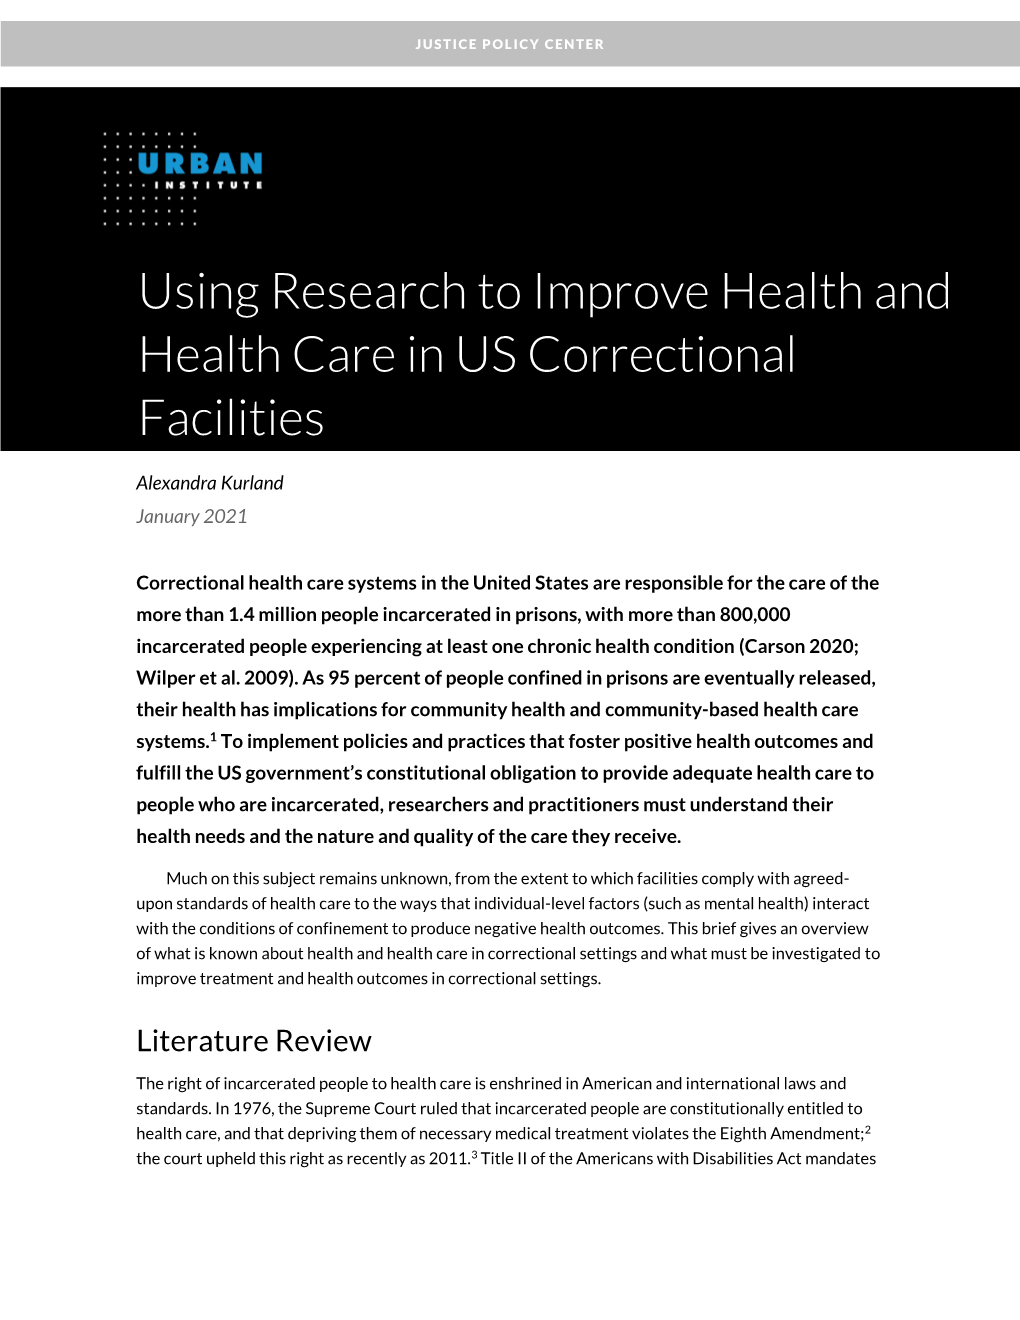 Using Research to Improve Health and Health Care in US Correctional Facilities